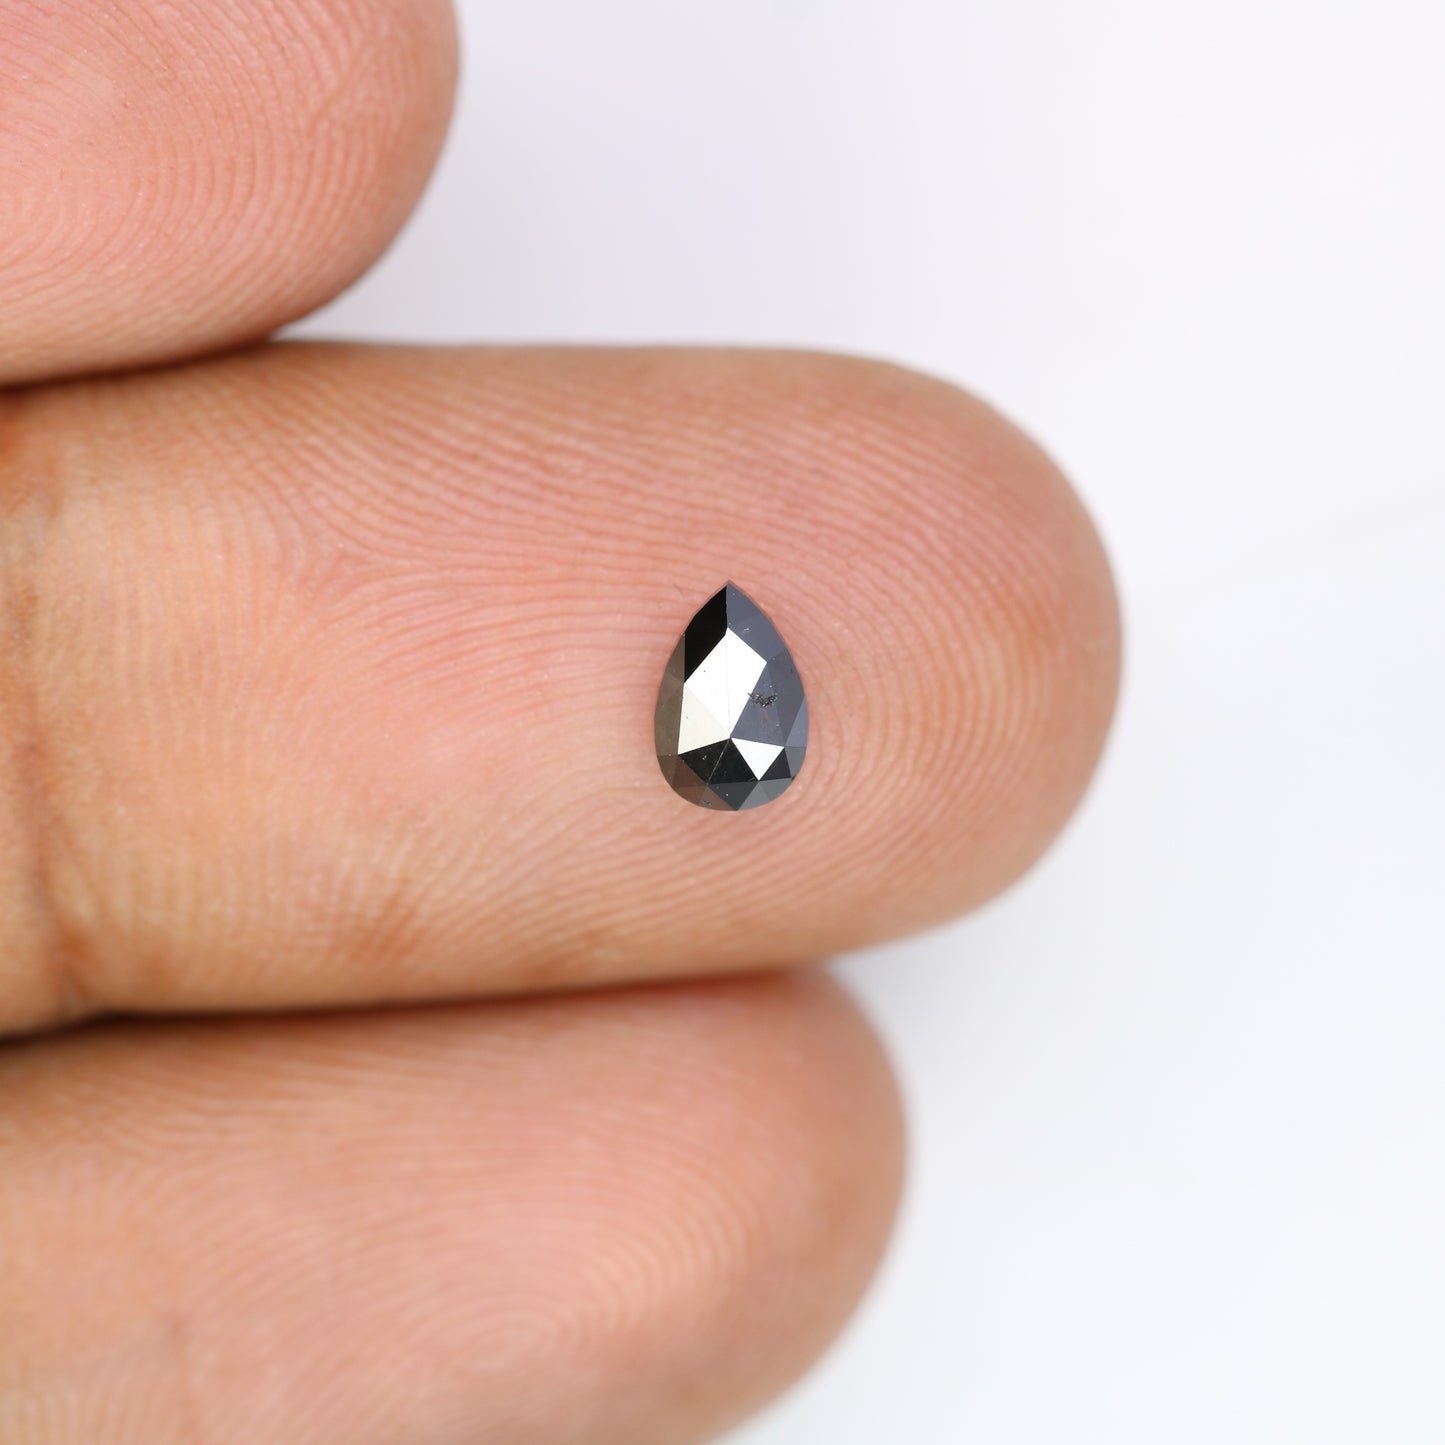 0.45 CT Pear Shaped Black Diamond For Engagement Ring